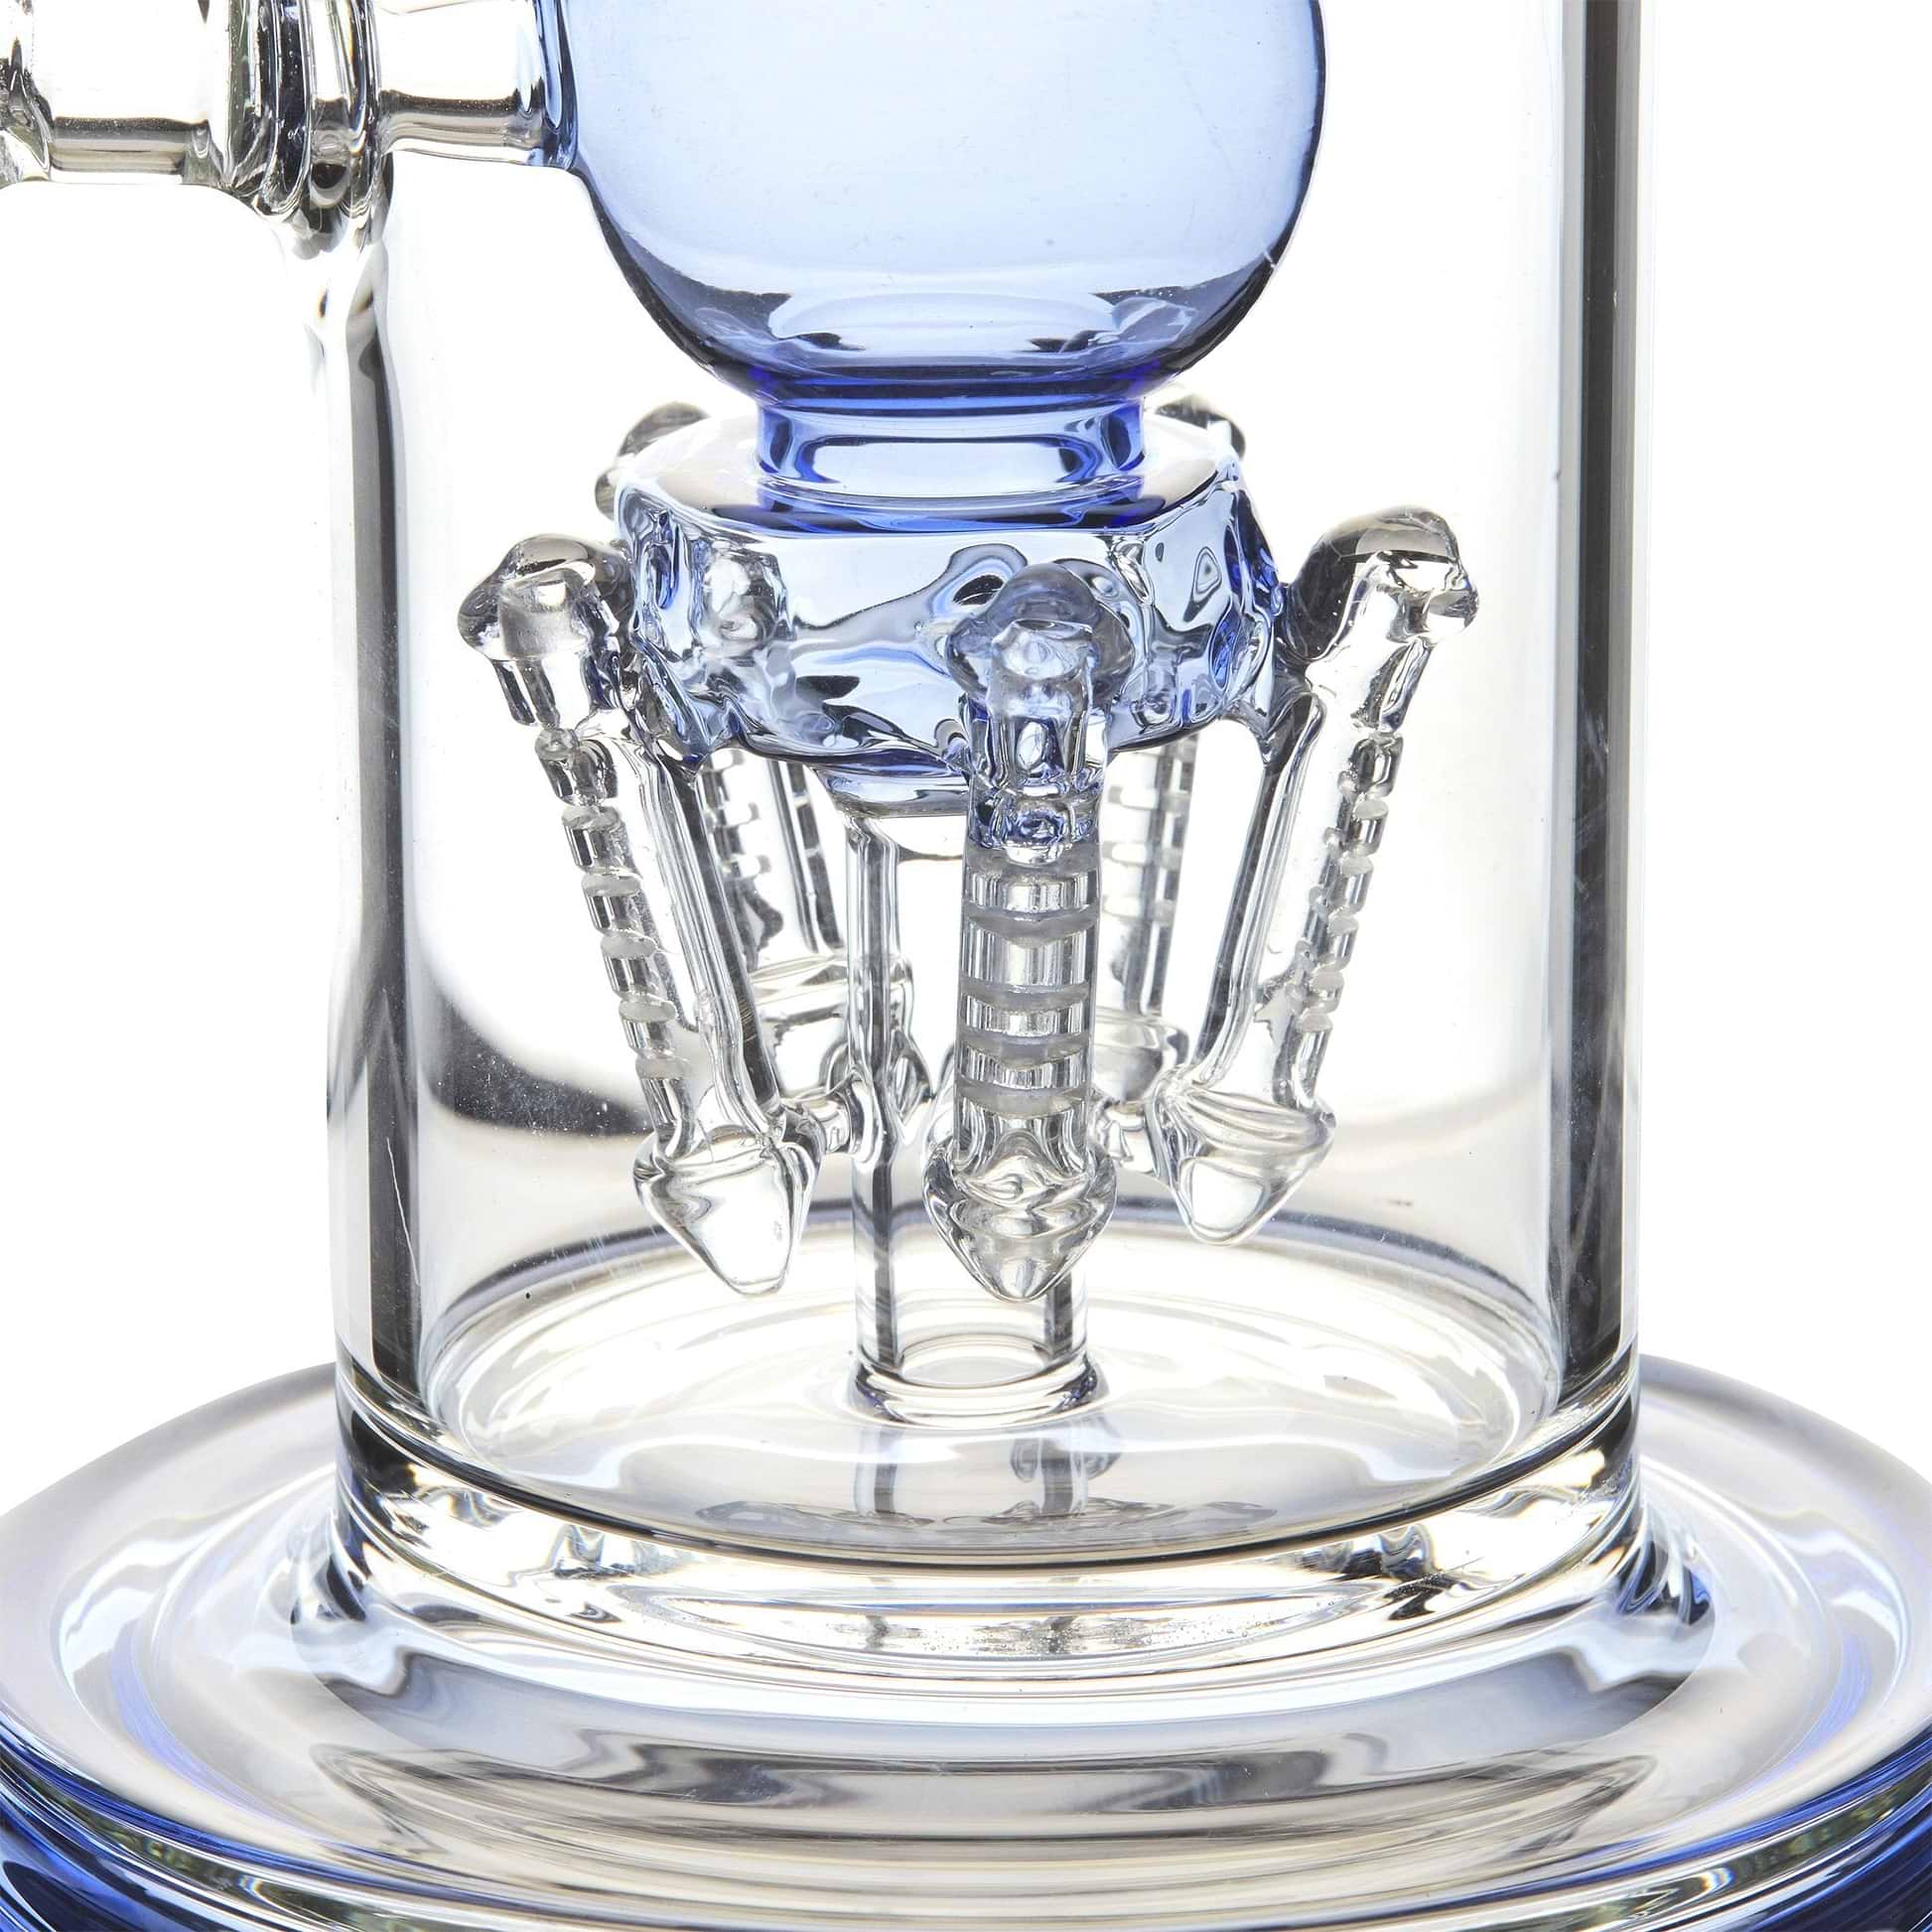 Bottom low angle shot of the matrix percolator and blue base of a 22-inch clear glass bong smoking device